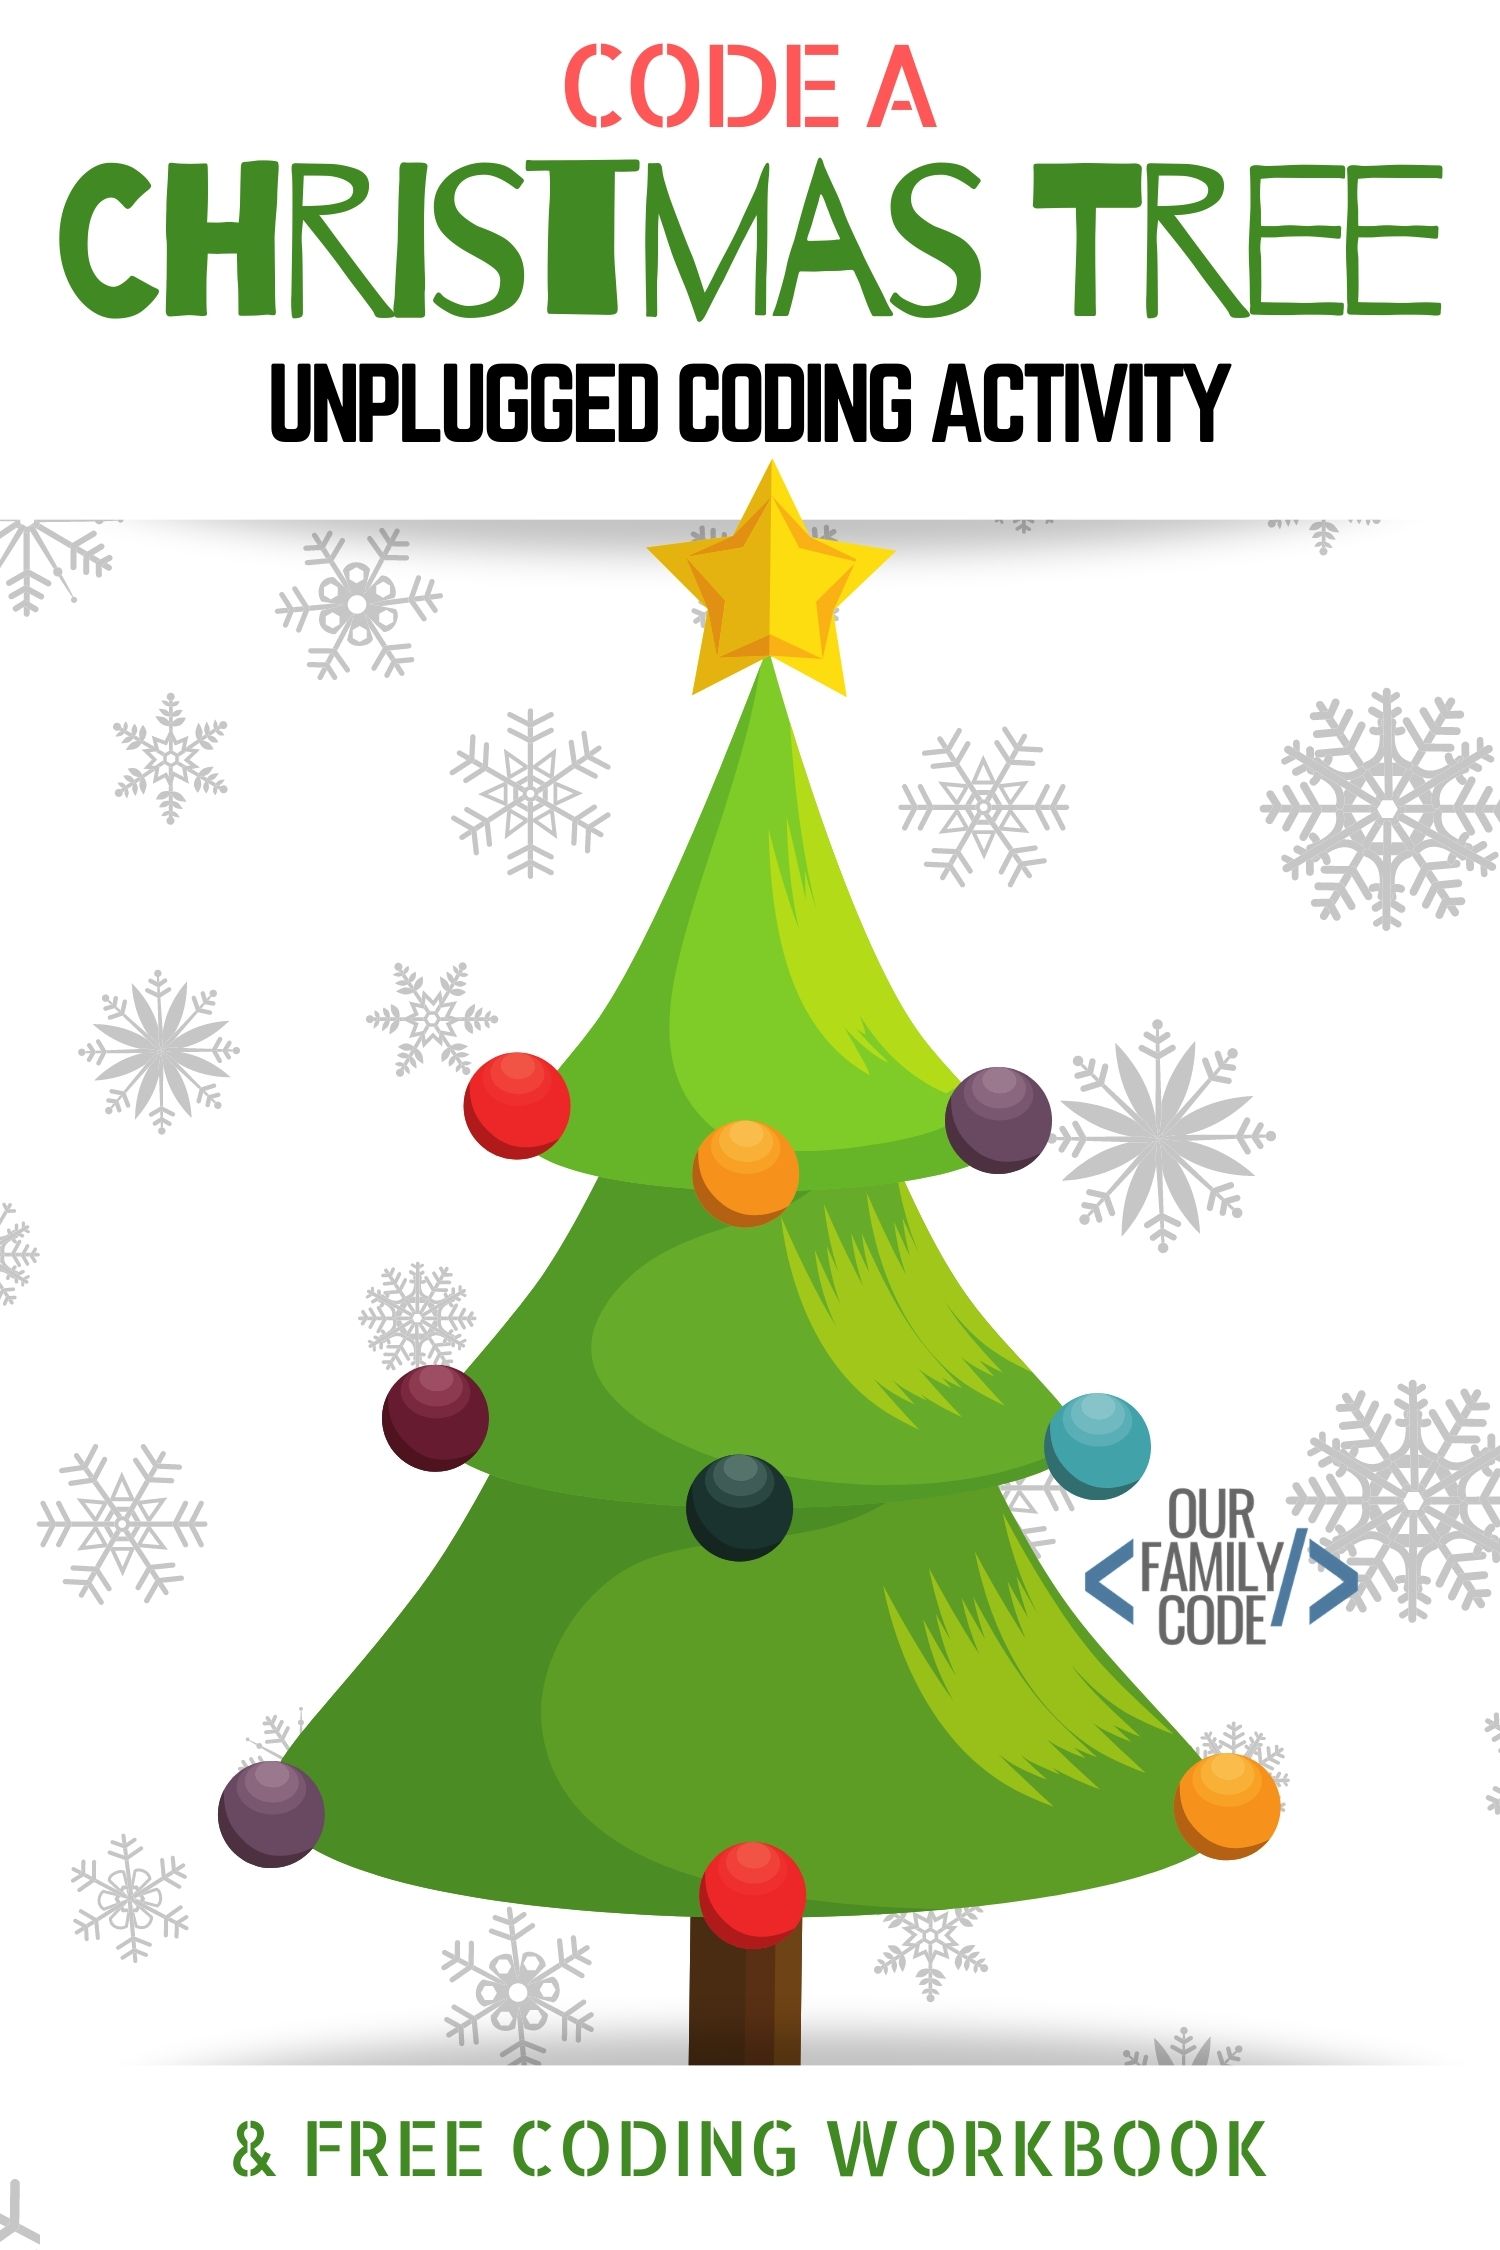 Code a Christmas Tree Unplugged Coding Activity 2 This Christmas tree algorithm art activity is an unplugged coding activity for kids K-8 to learn how everyday actions can be turned into a computer program.